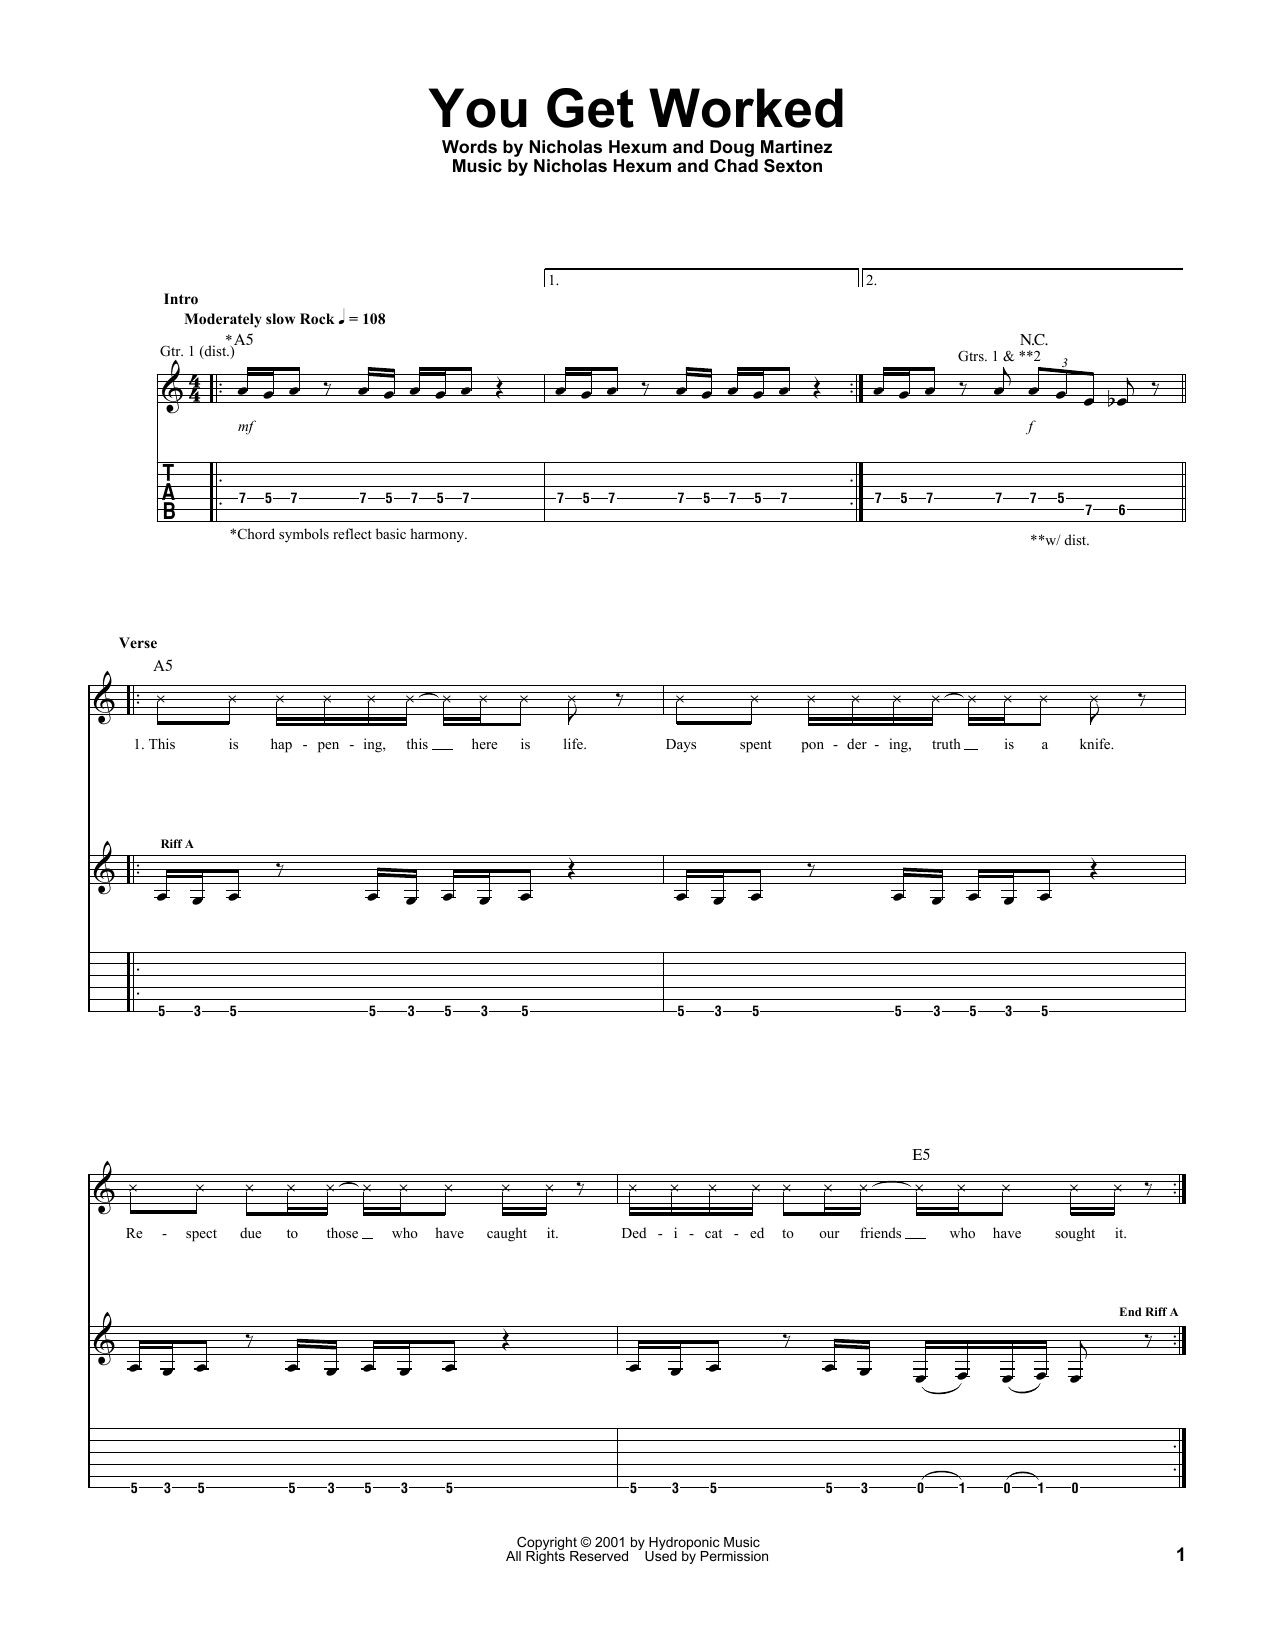 Download 311 You Get Worked Sheet Music